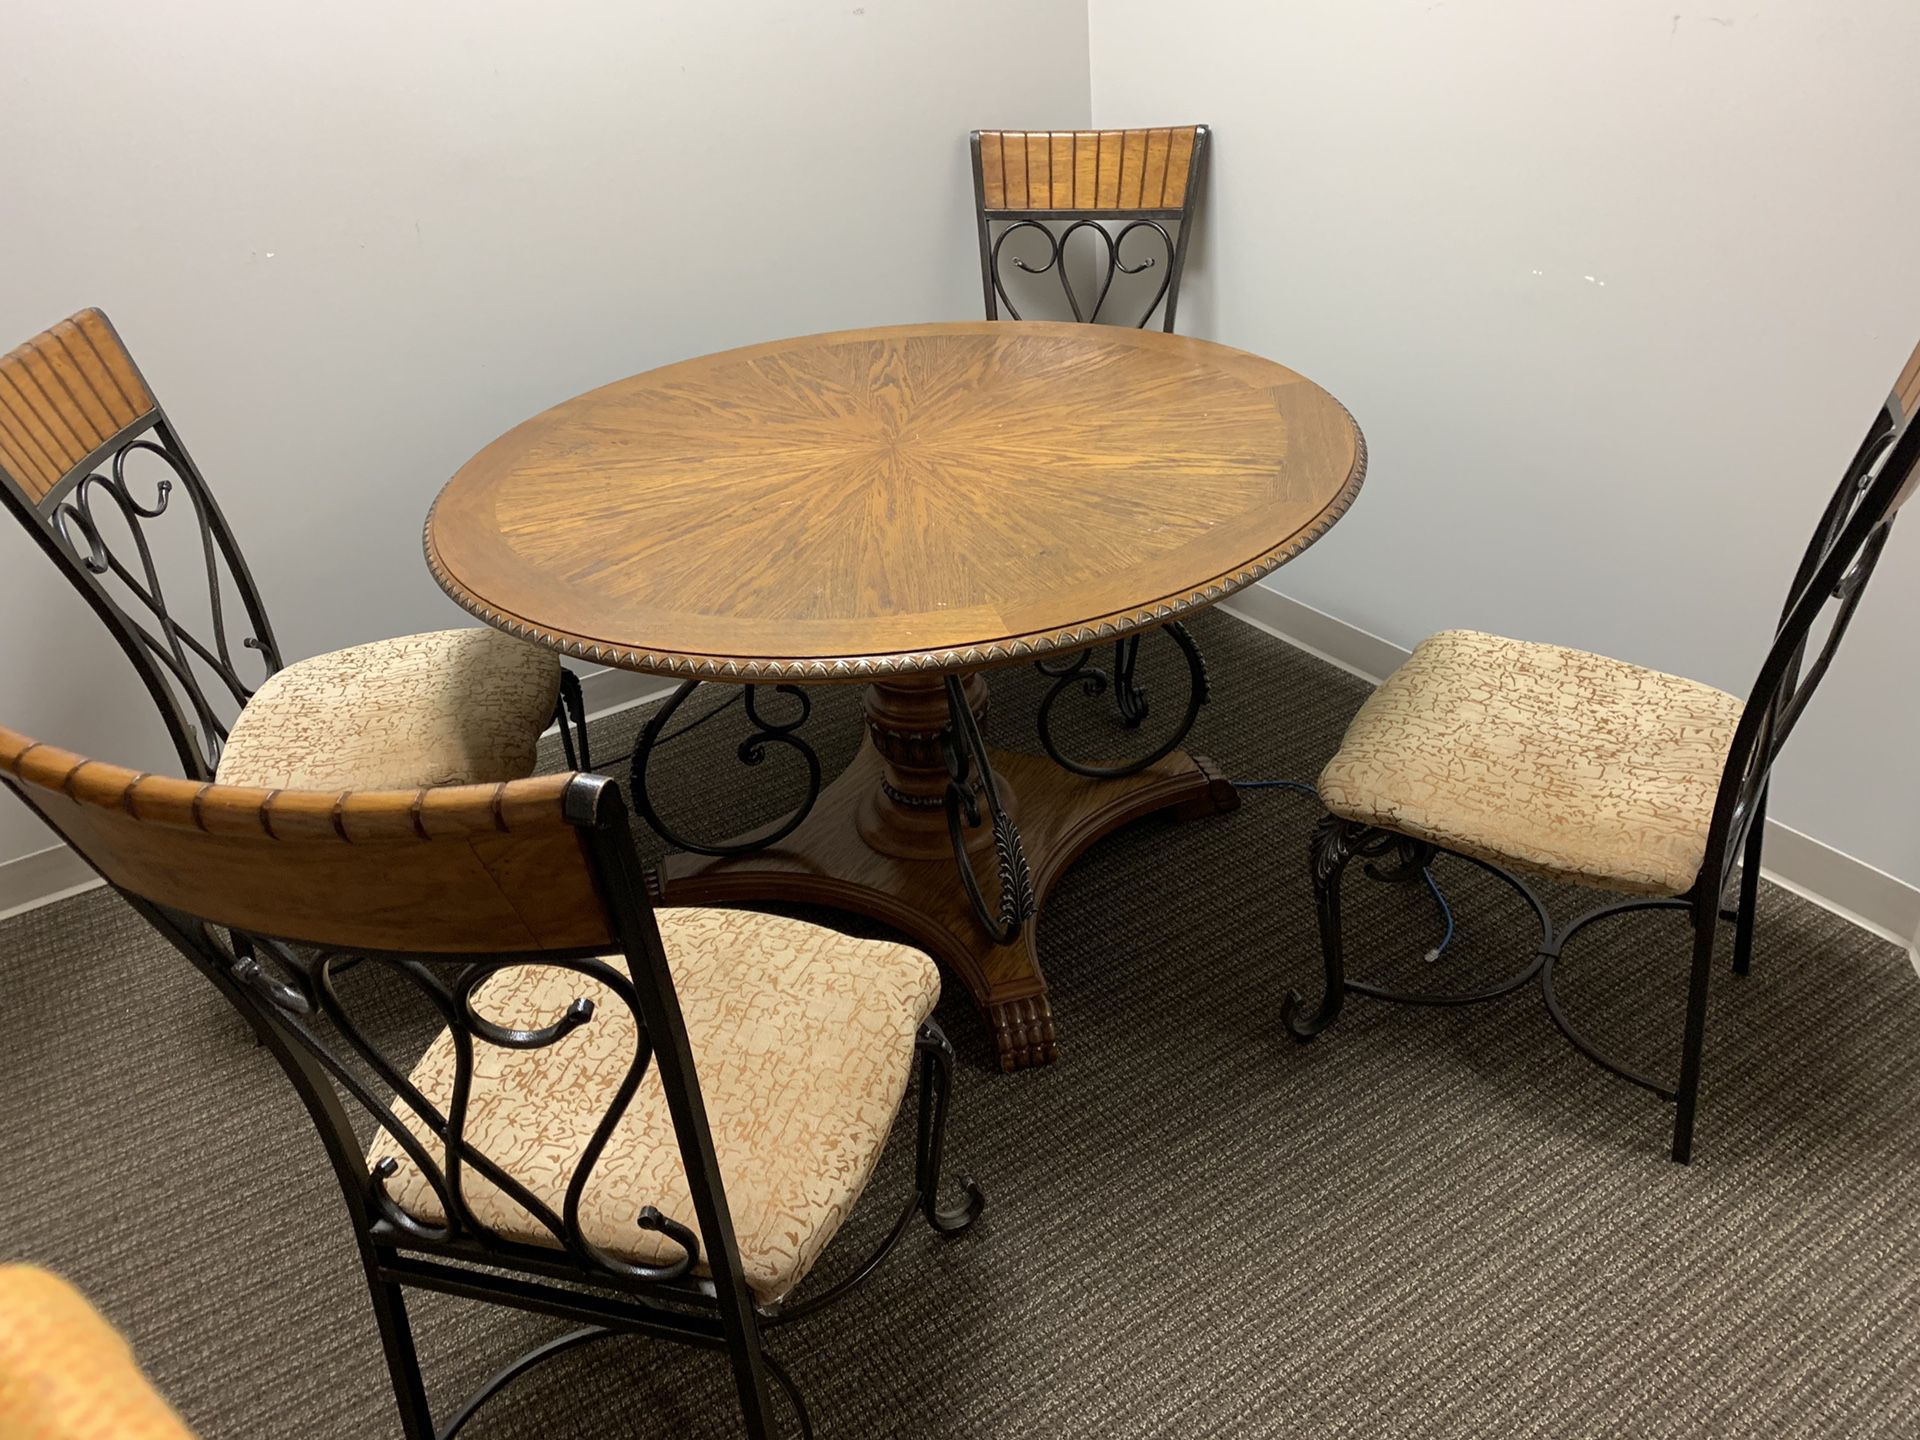 Real Wood table with dining chairs